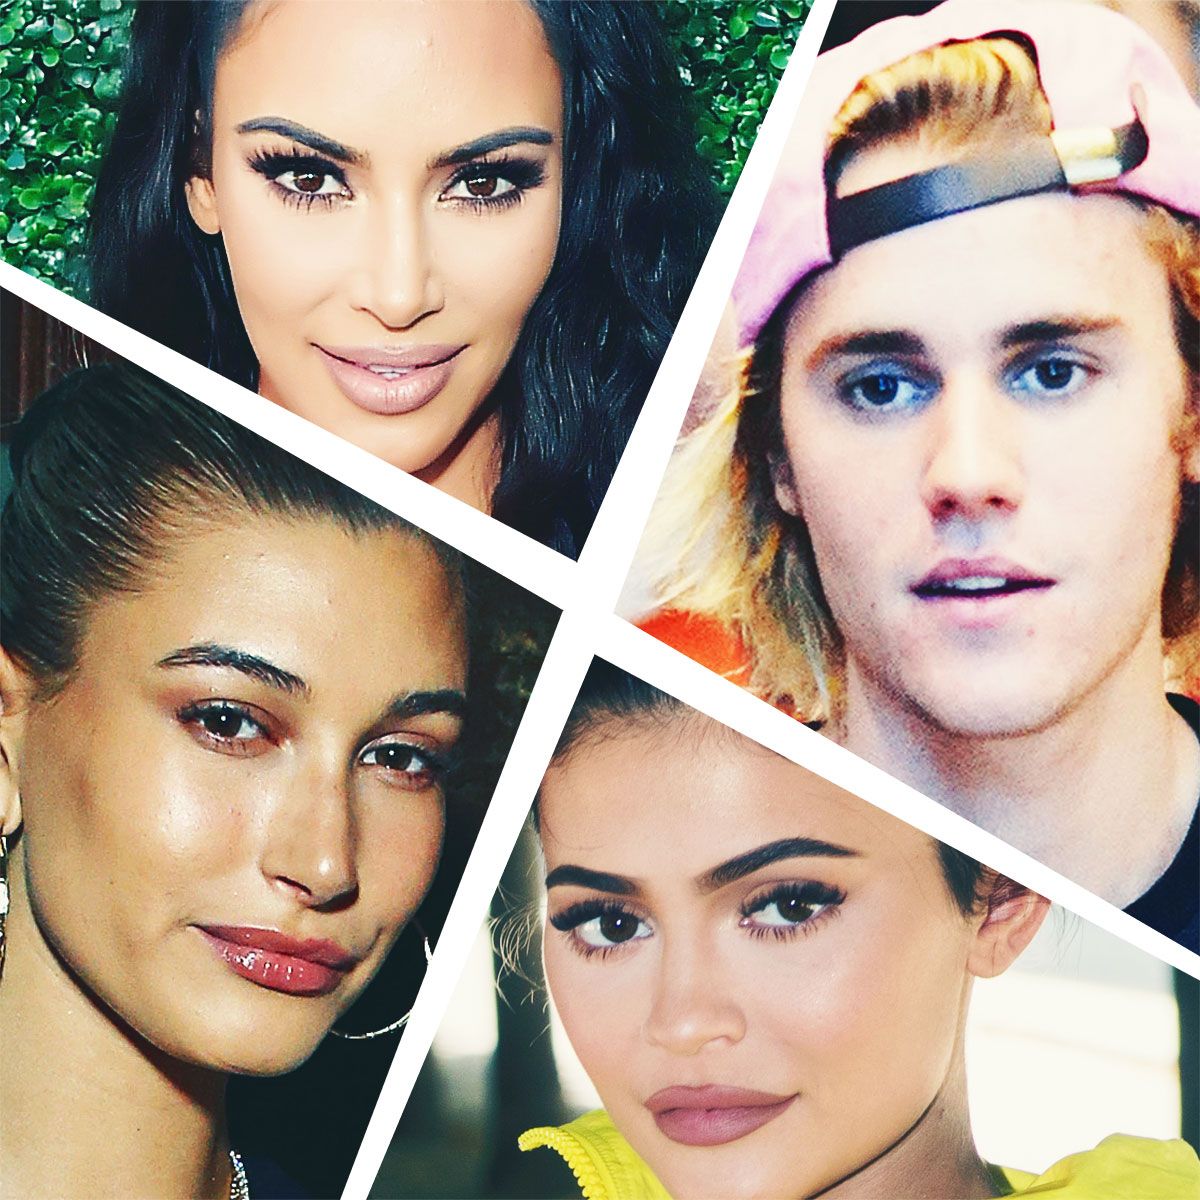 Hailey Baldwin May Have Posted About the Selena Gomez-Justin Bieber  Instagram Feud